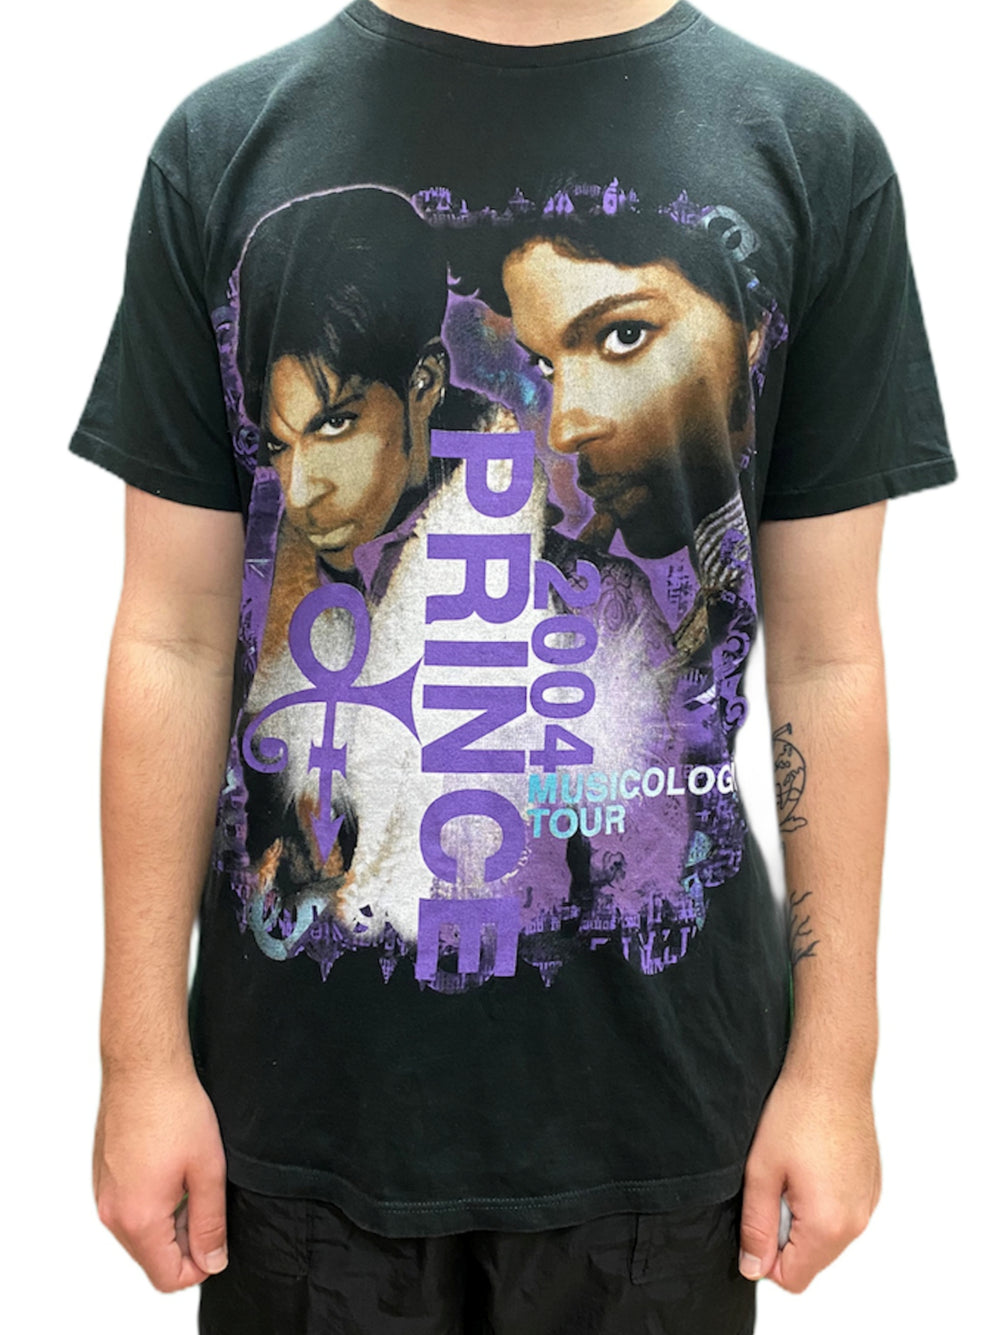 Prince – Musicology Tour 2004 Official T Shirt Size Large Pre-Loved